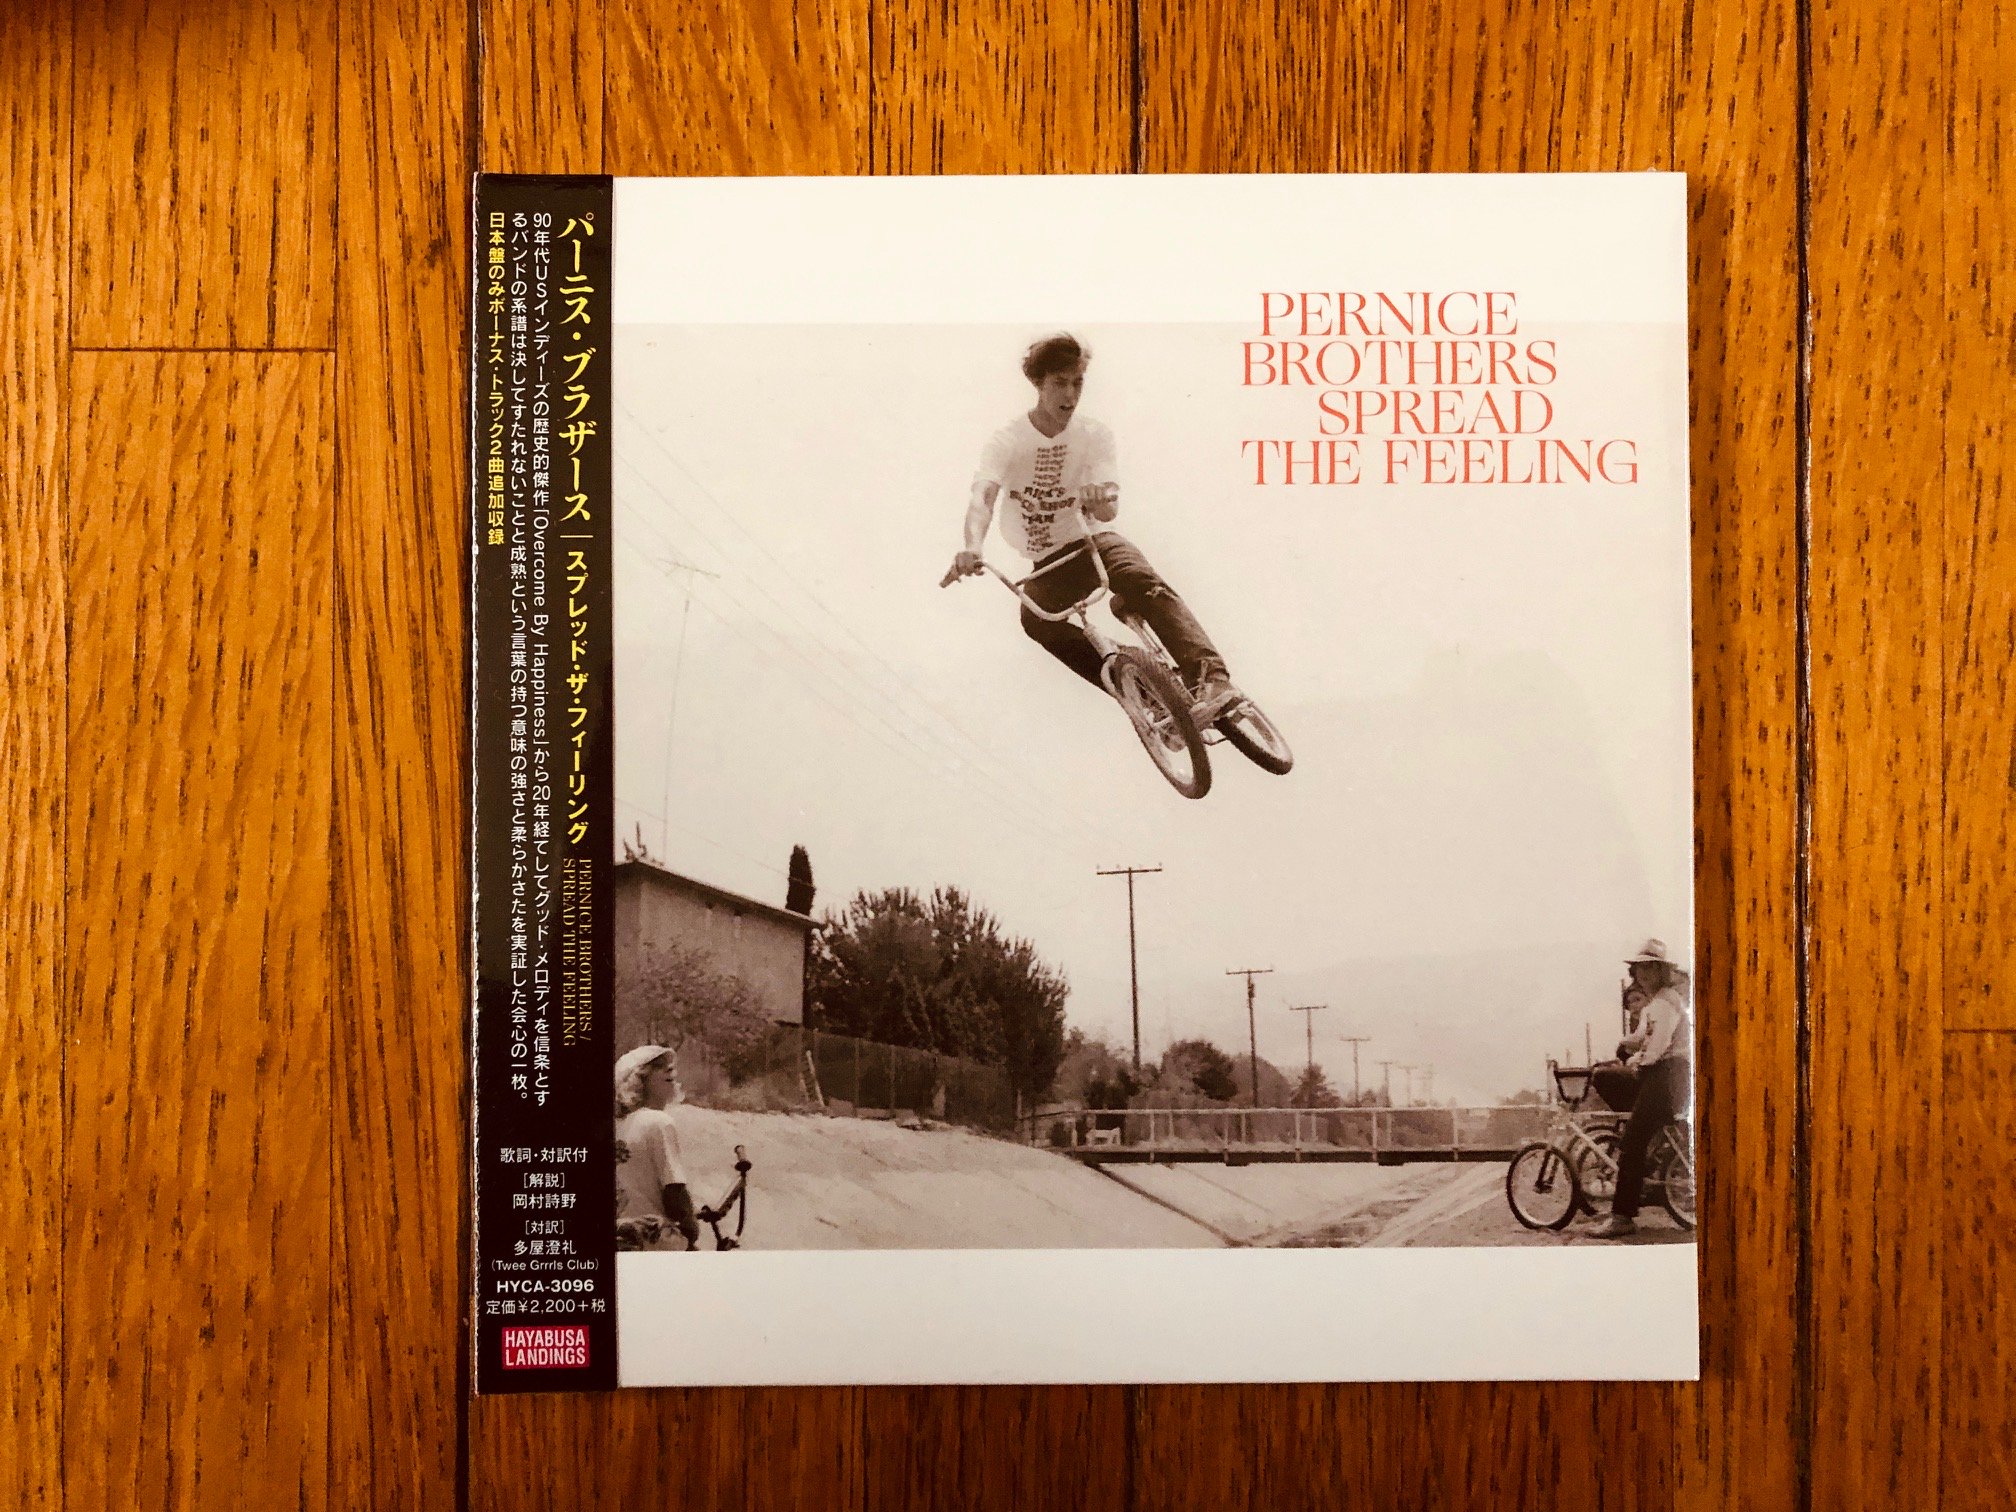 Cd Pernice Brothers パーニス ブラザース Spread The Feeling スプレッド ザ フィーリング 国内盤新品 Used Records Cds Books And More Classics